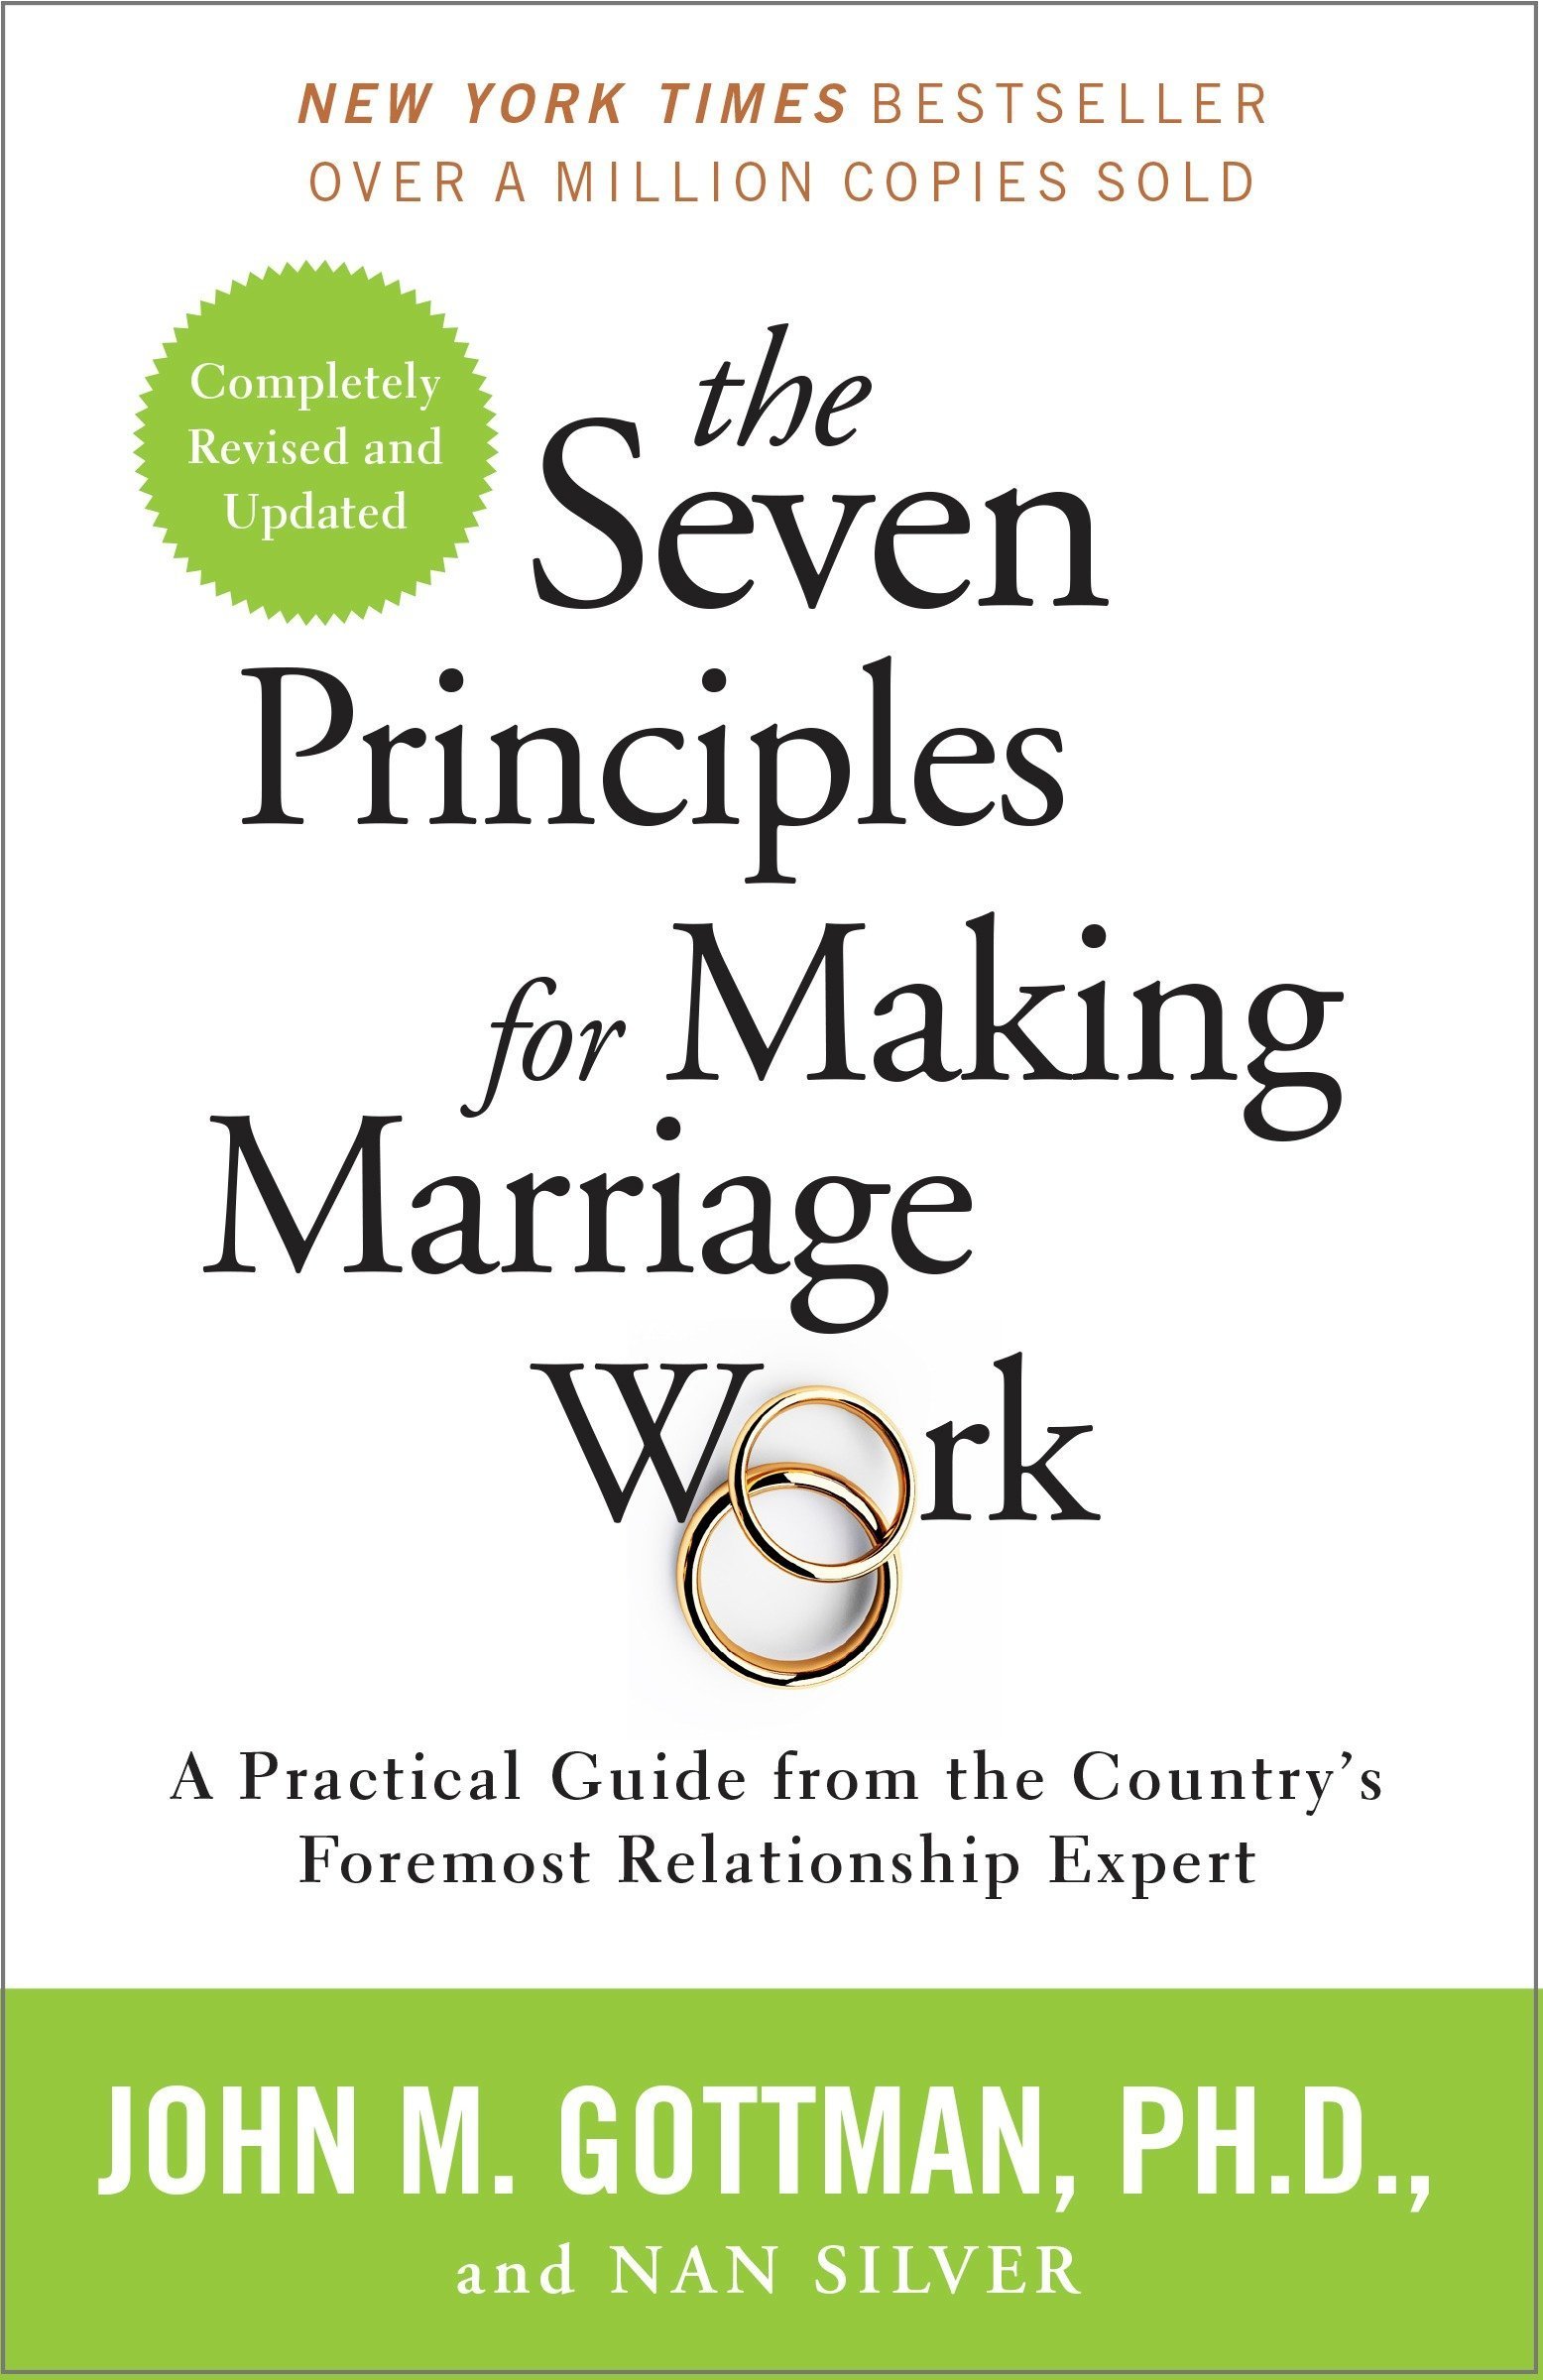 The Seven Principles for Making Marriage Work by John M. Gottman and Nan Silver